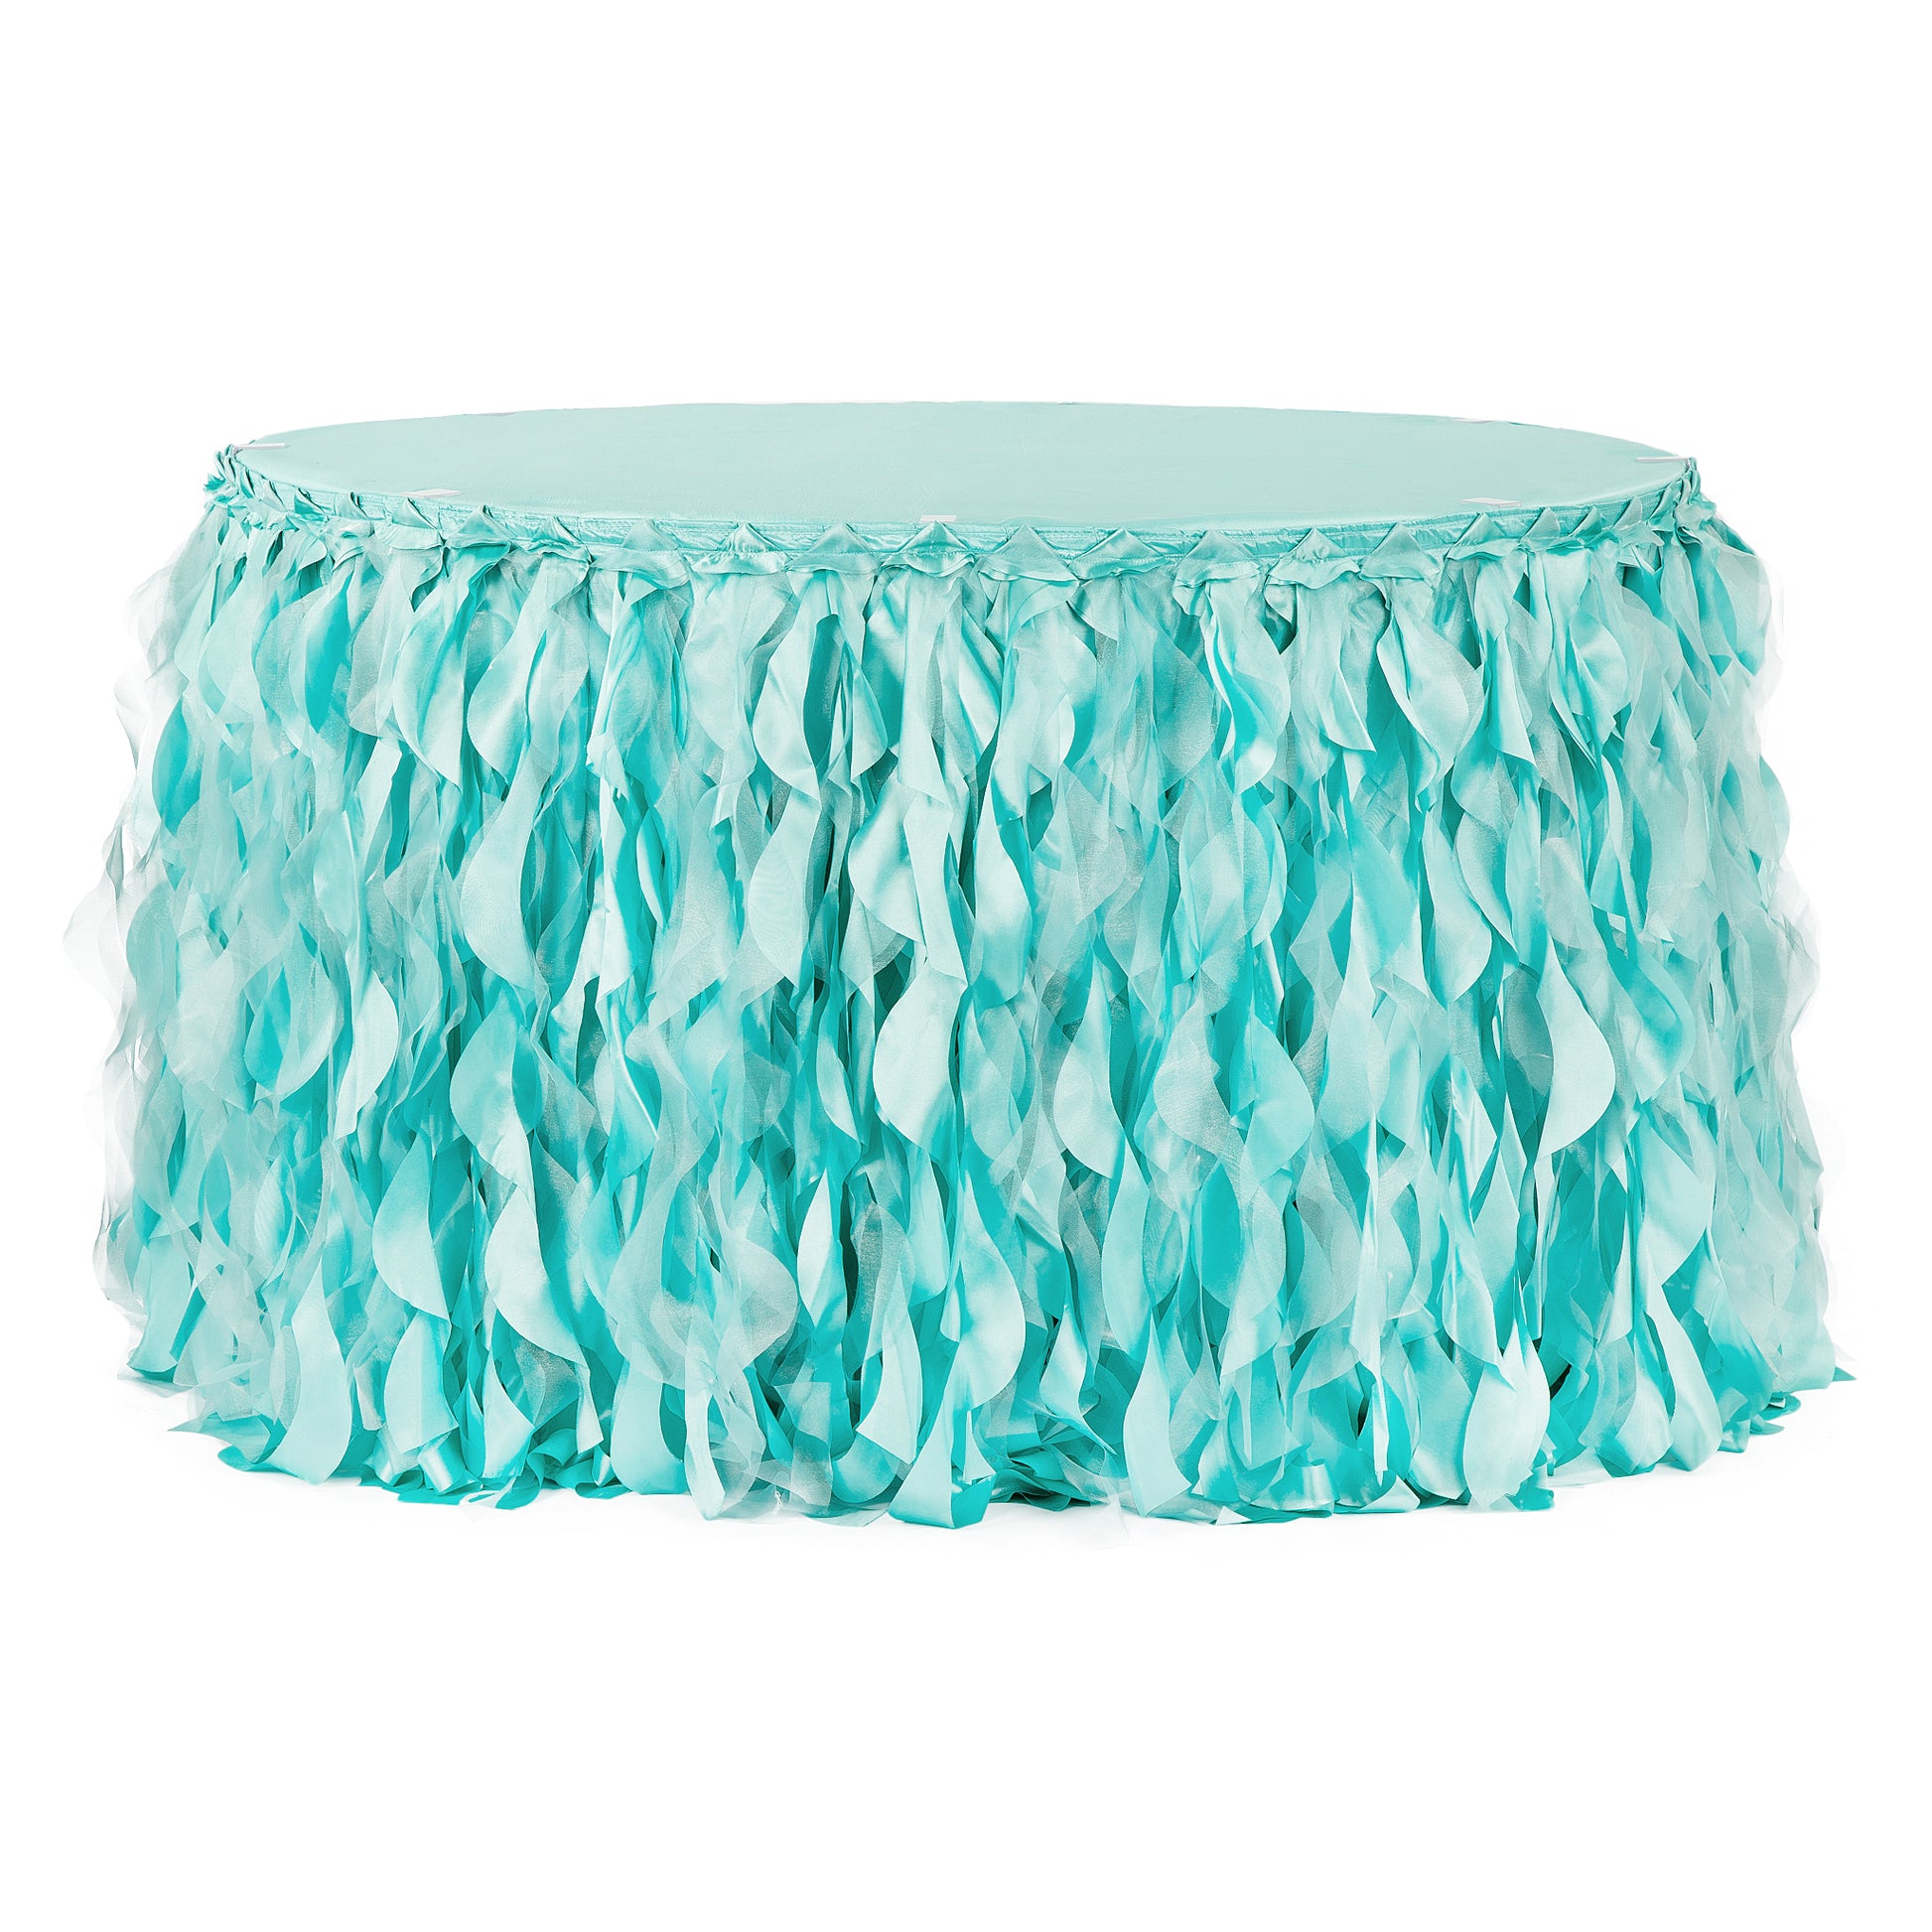 Curly Willow 17ft Table Skirt - Turquoise - CV Linens